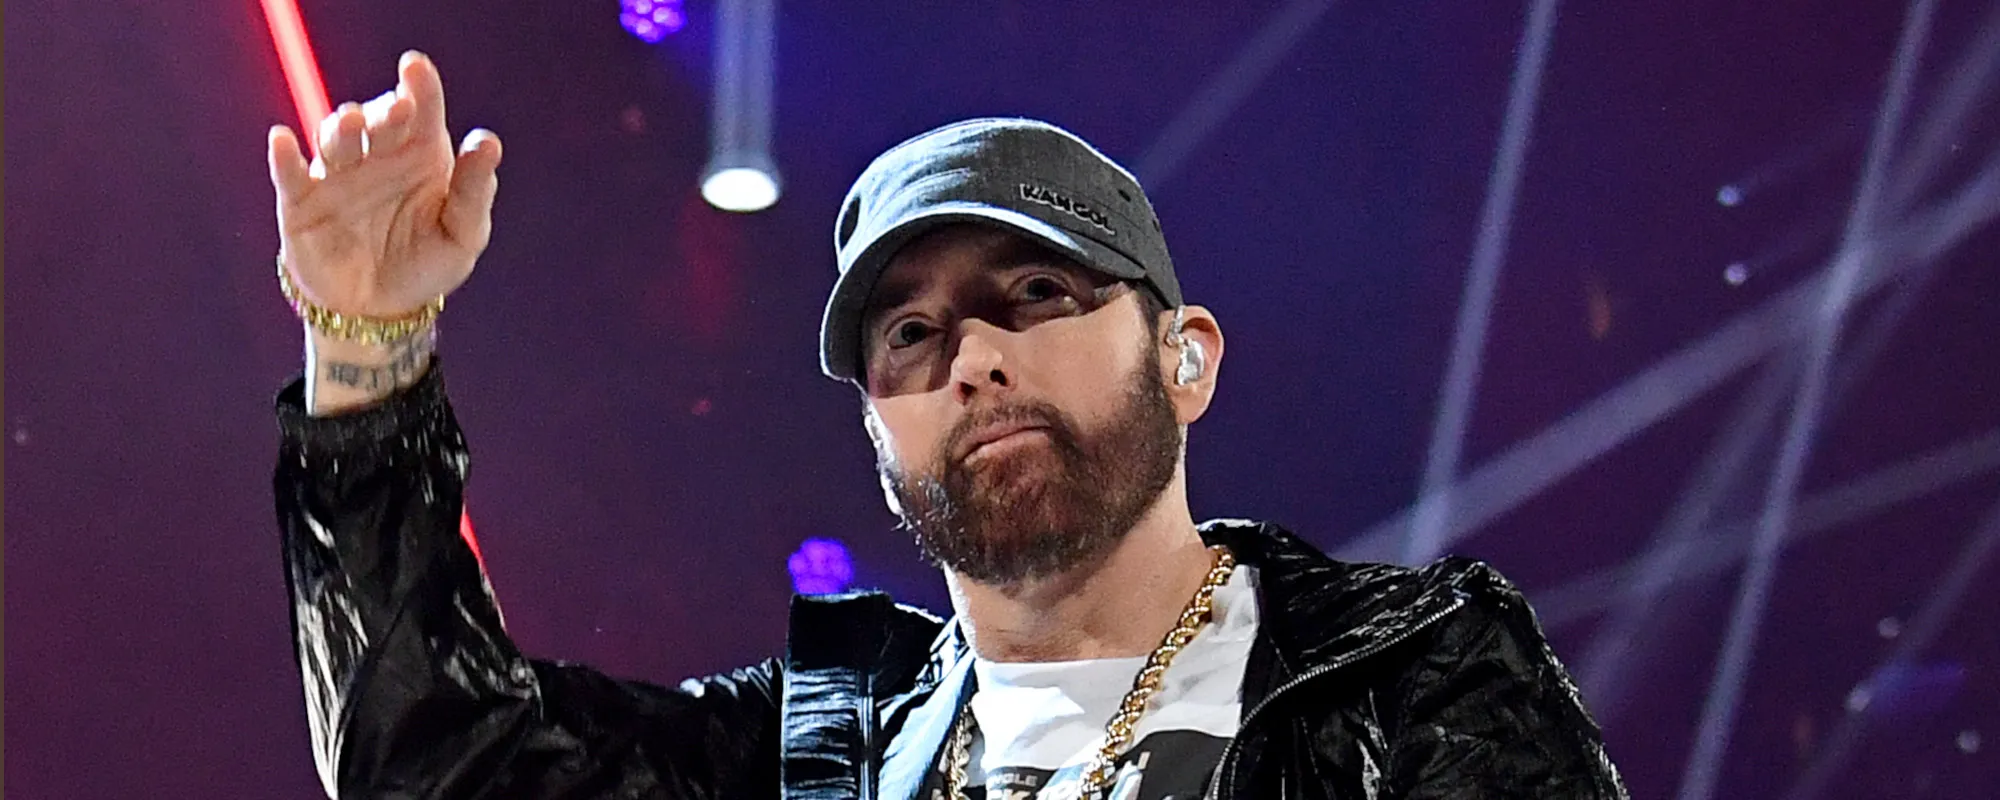 5 Songs You Didn’t Know Eminem Produced